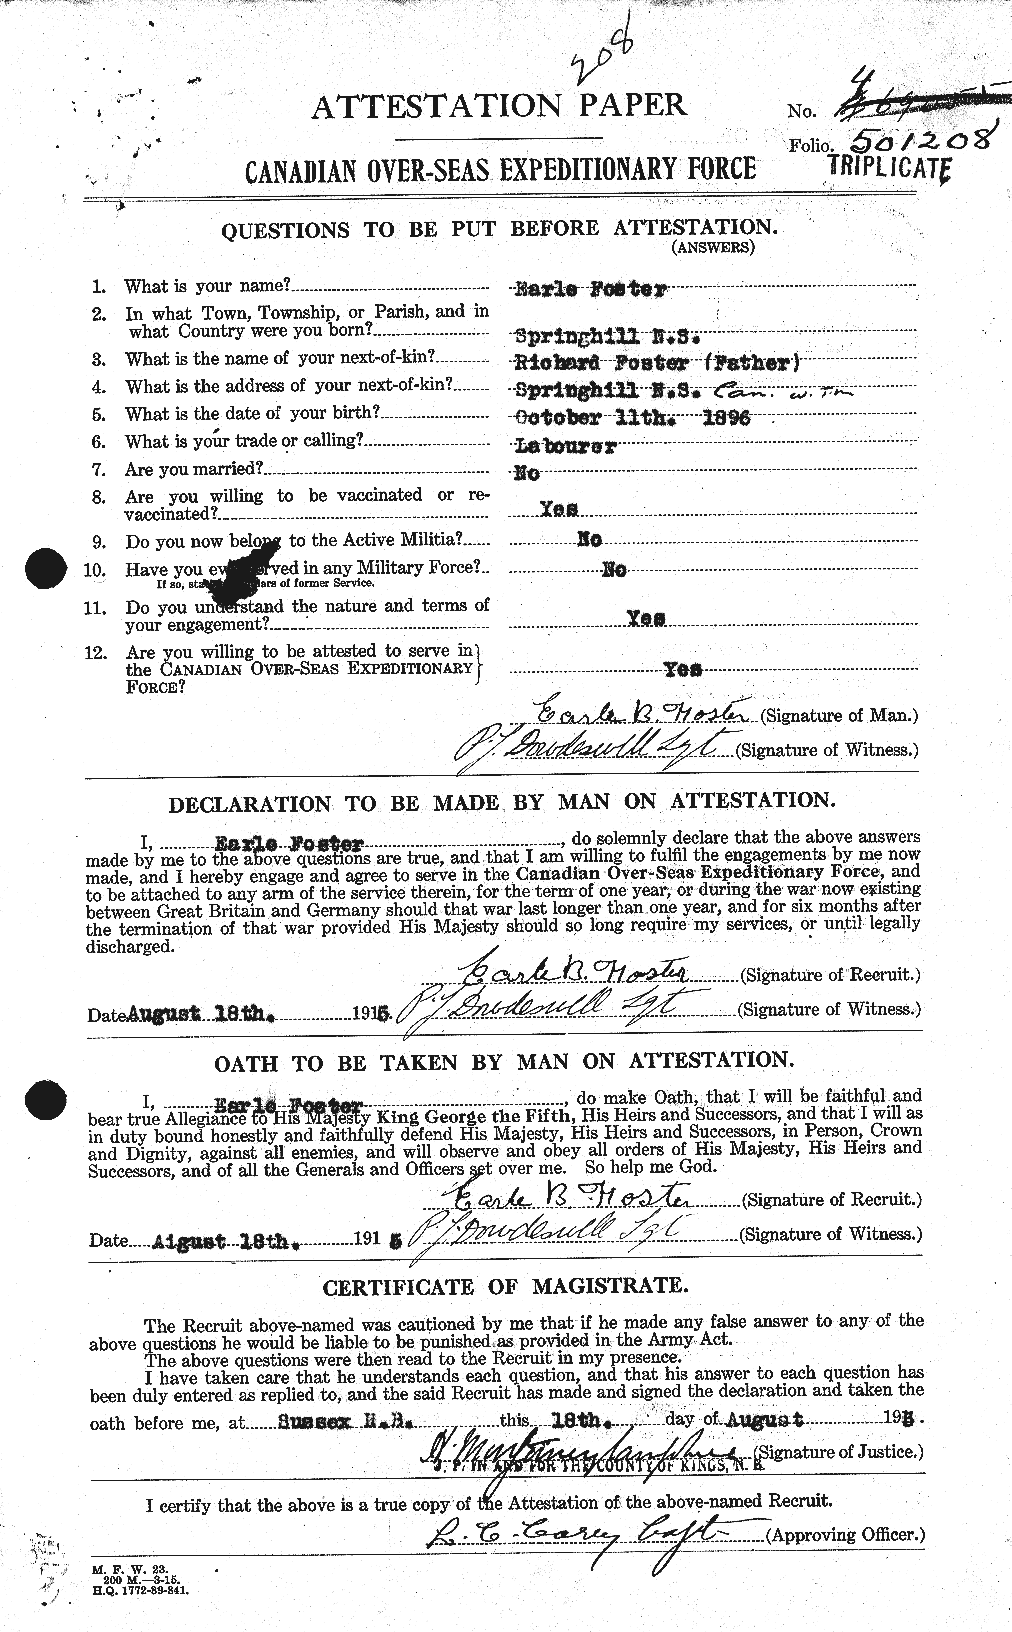 Personnel Records of the First World War - CEF 330572a